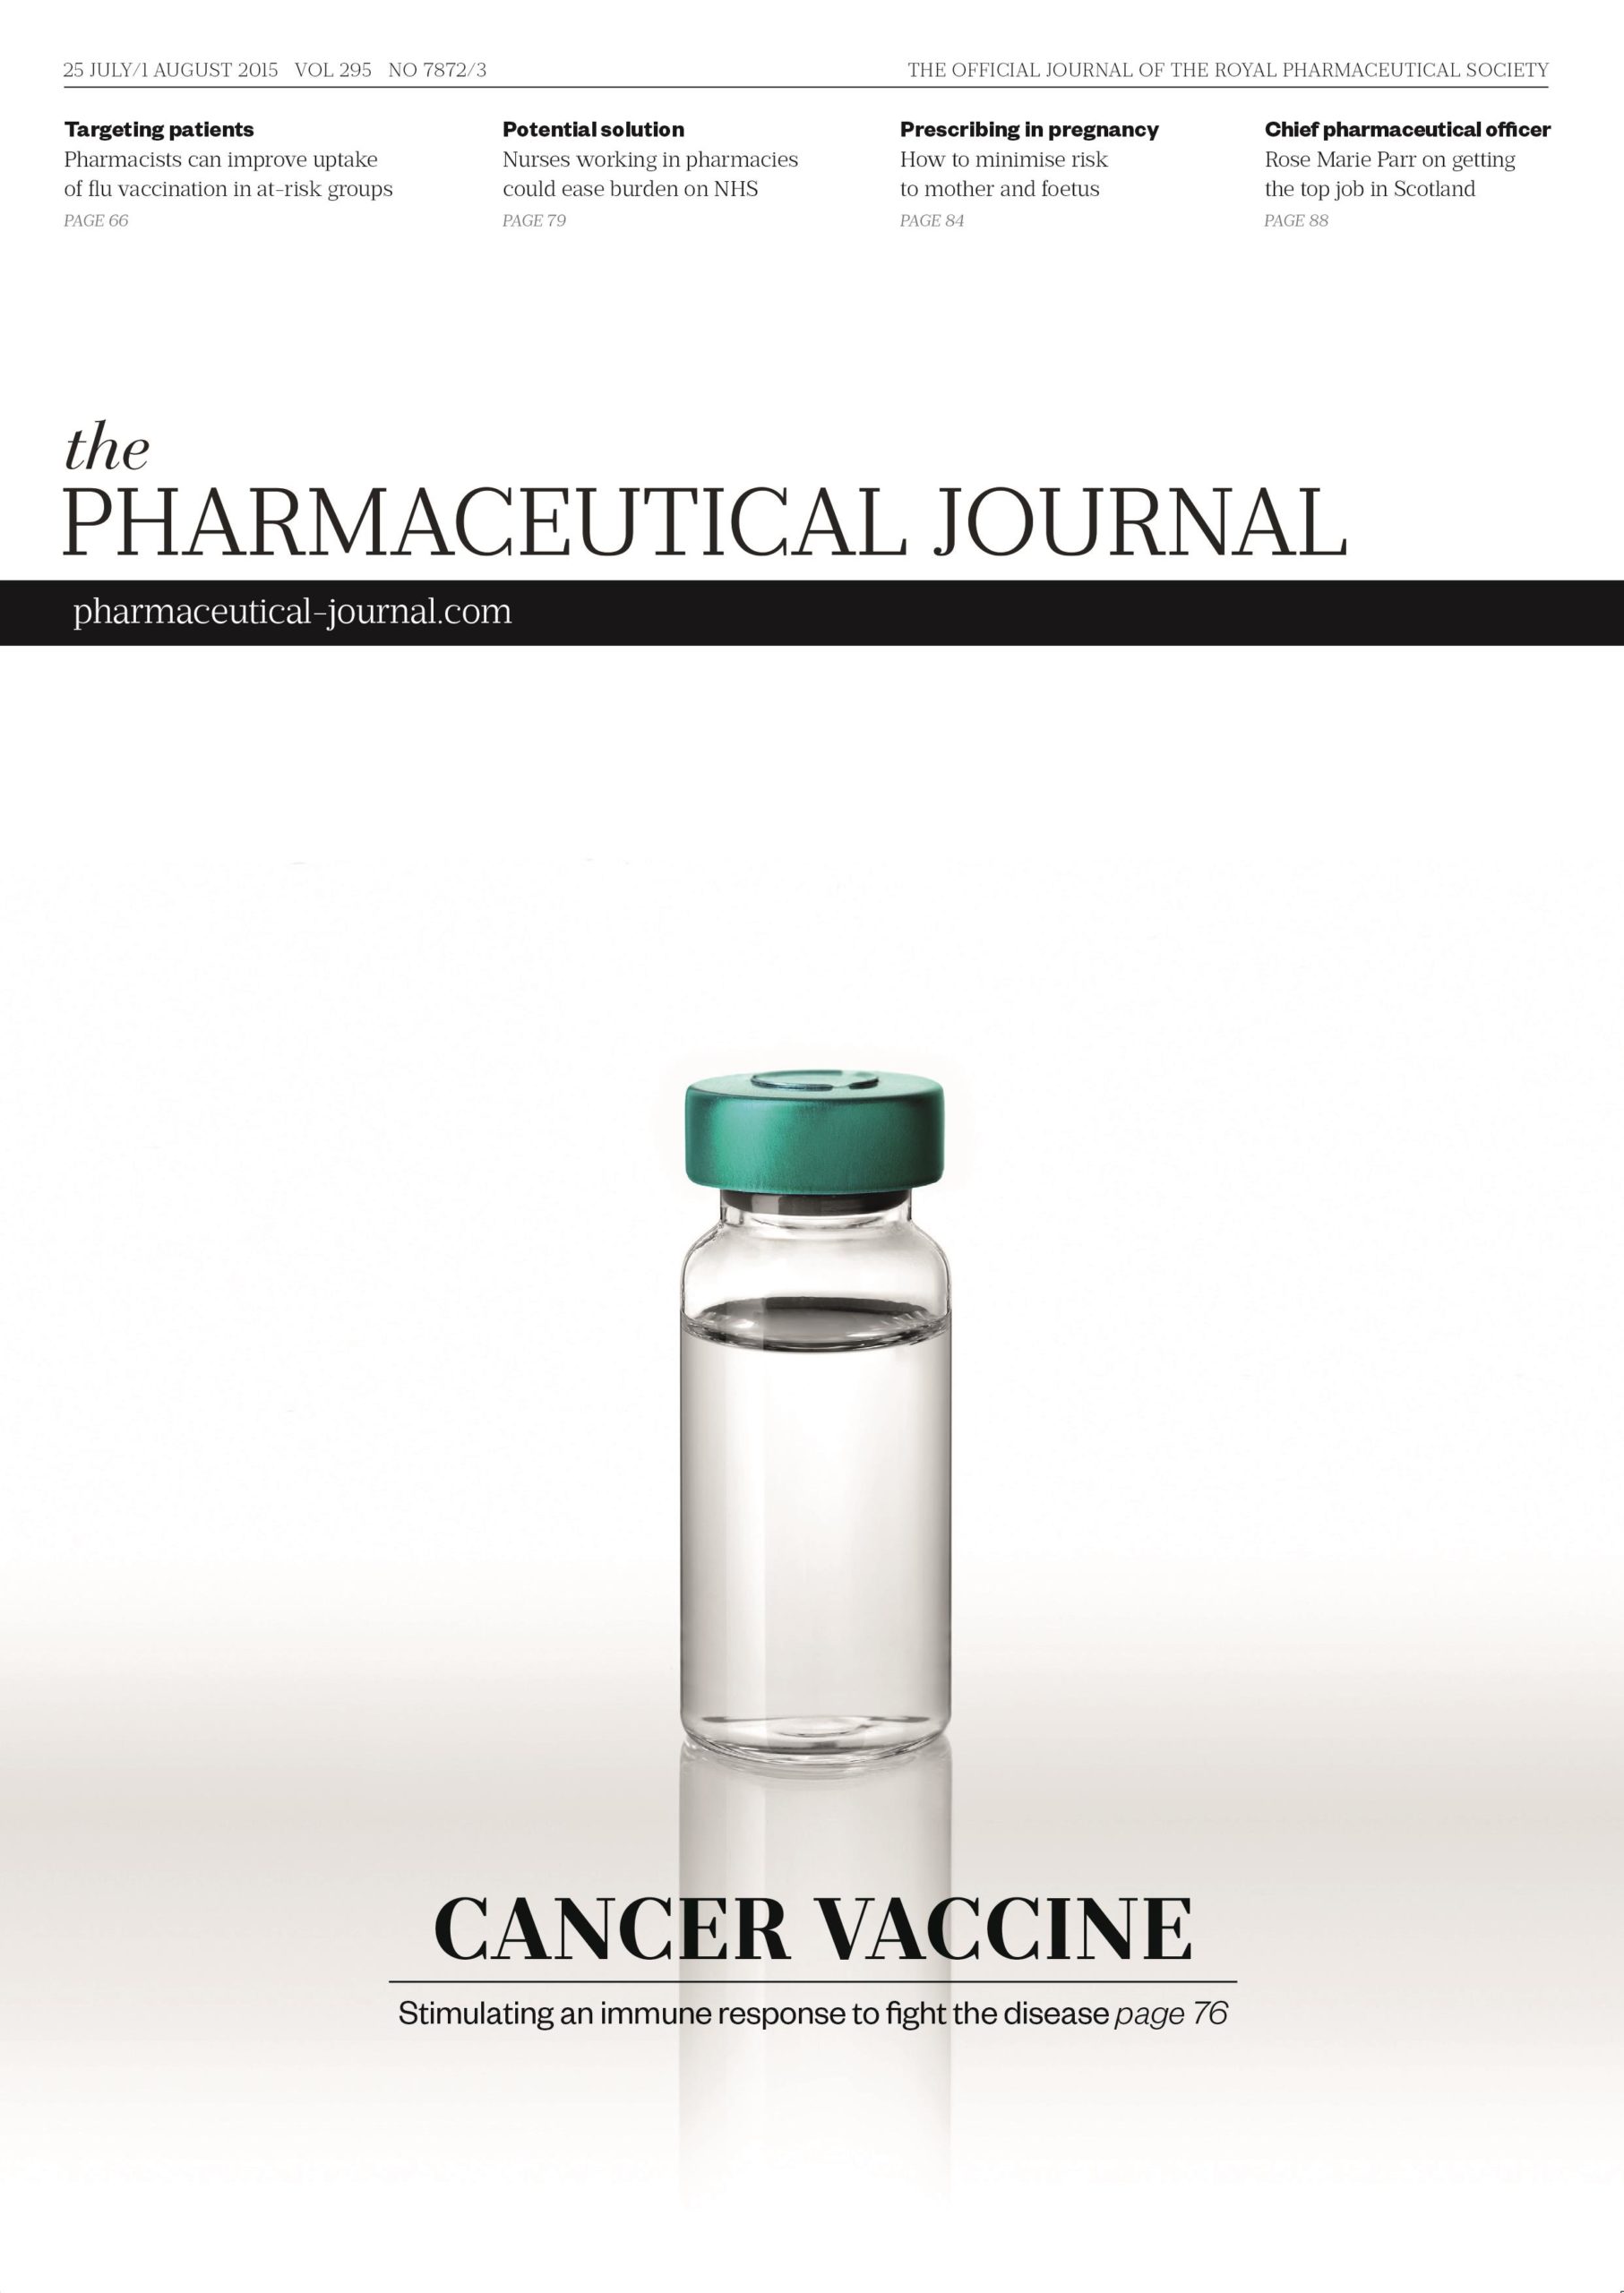 Publication issue cover for PJ, 25 July/1 August 2015, Vol 295, No 7872/3